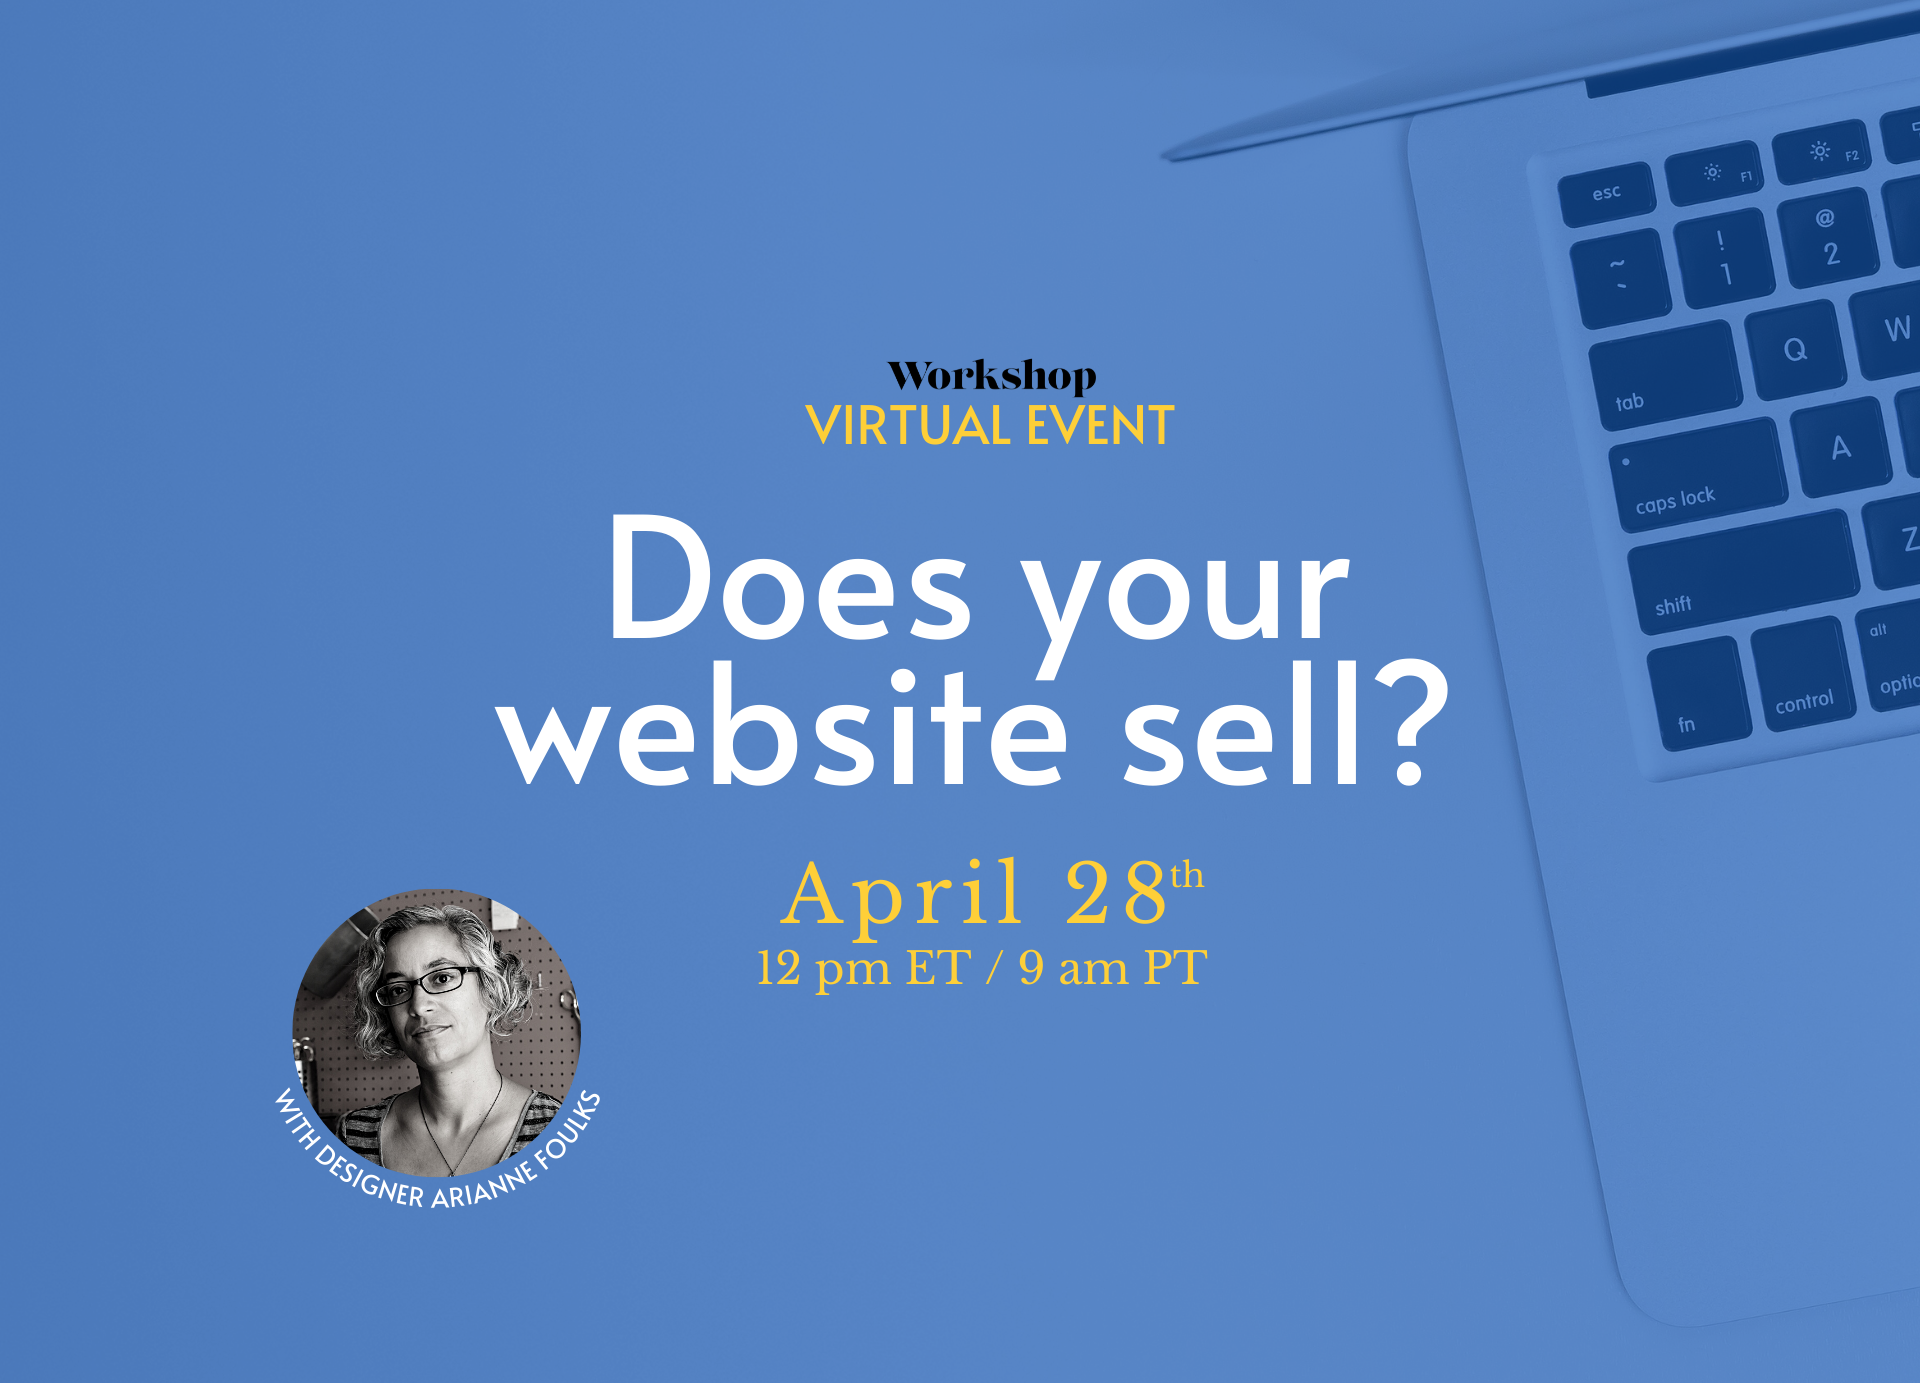 Workshop Virtual Event: Does your website sell? With designer Arianne Foulks. April 28th, 12 pm ET/9 am PT